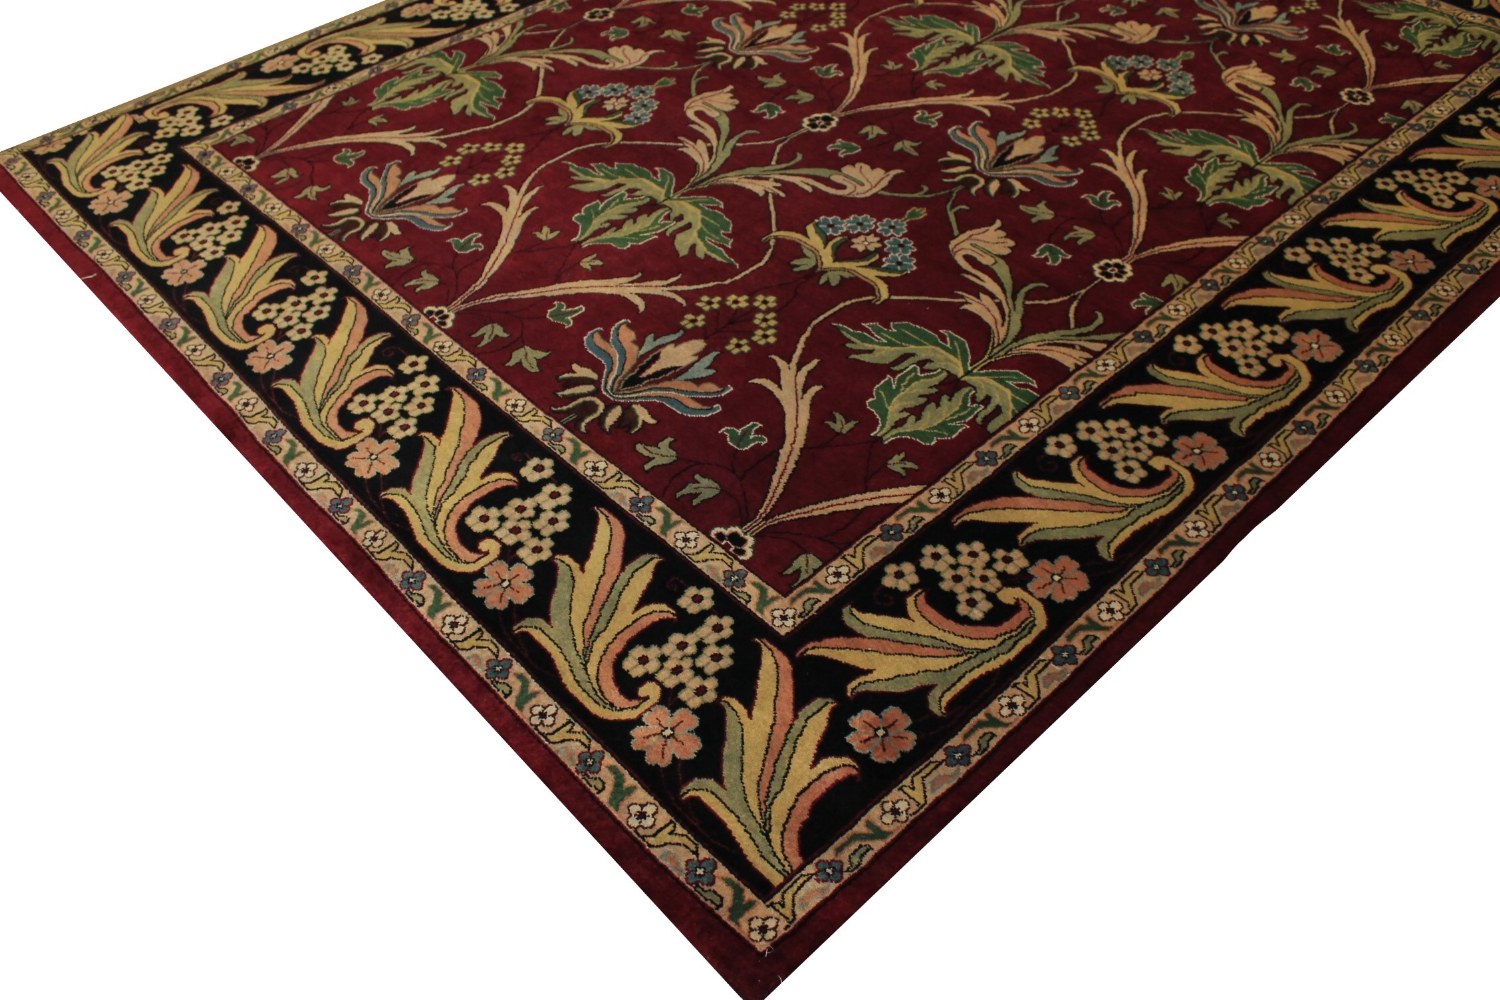 9x12 Traditional Hand Knotted Wool Area Rug - MR0105